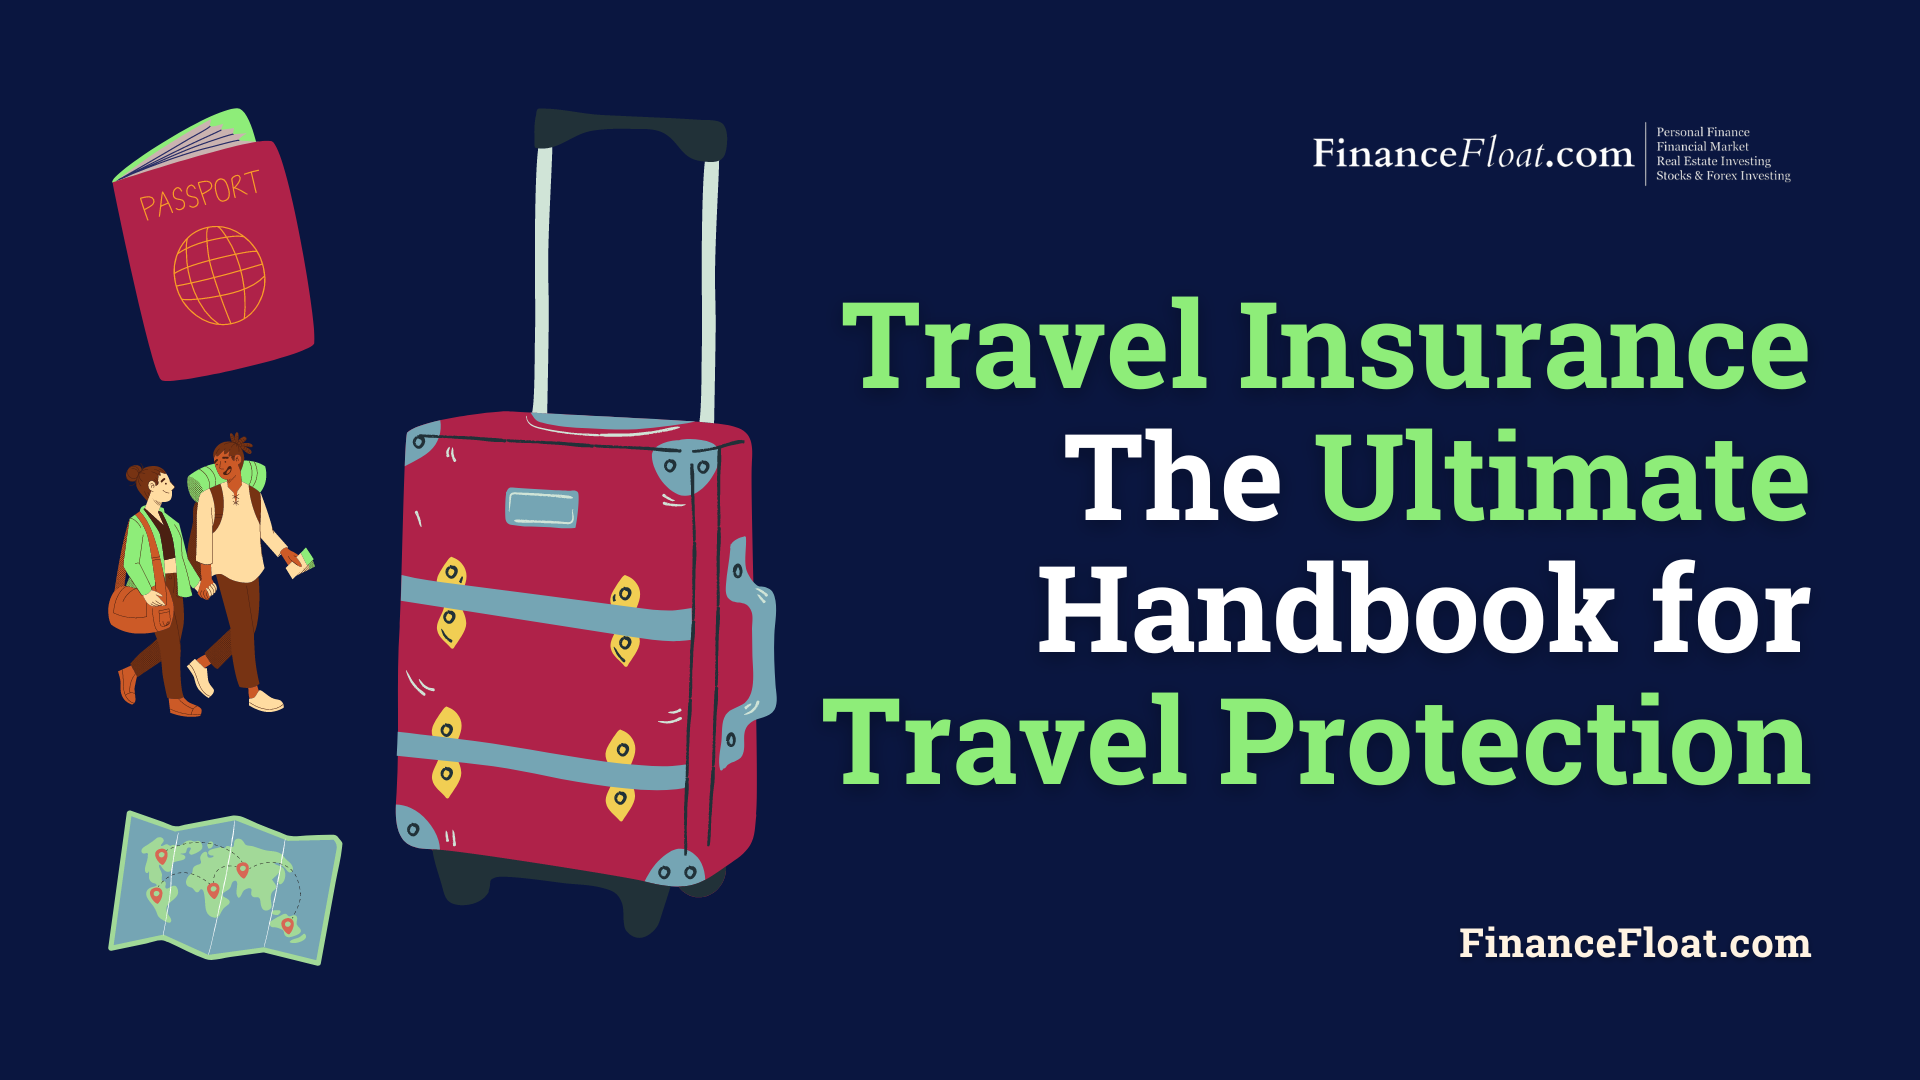 Travel Insurance The Ultimate Handbook for Travel Protection